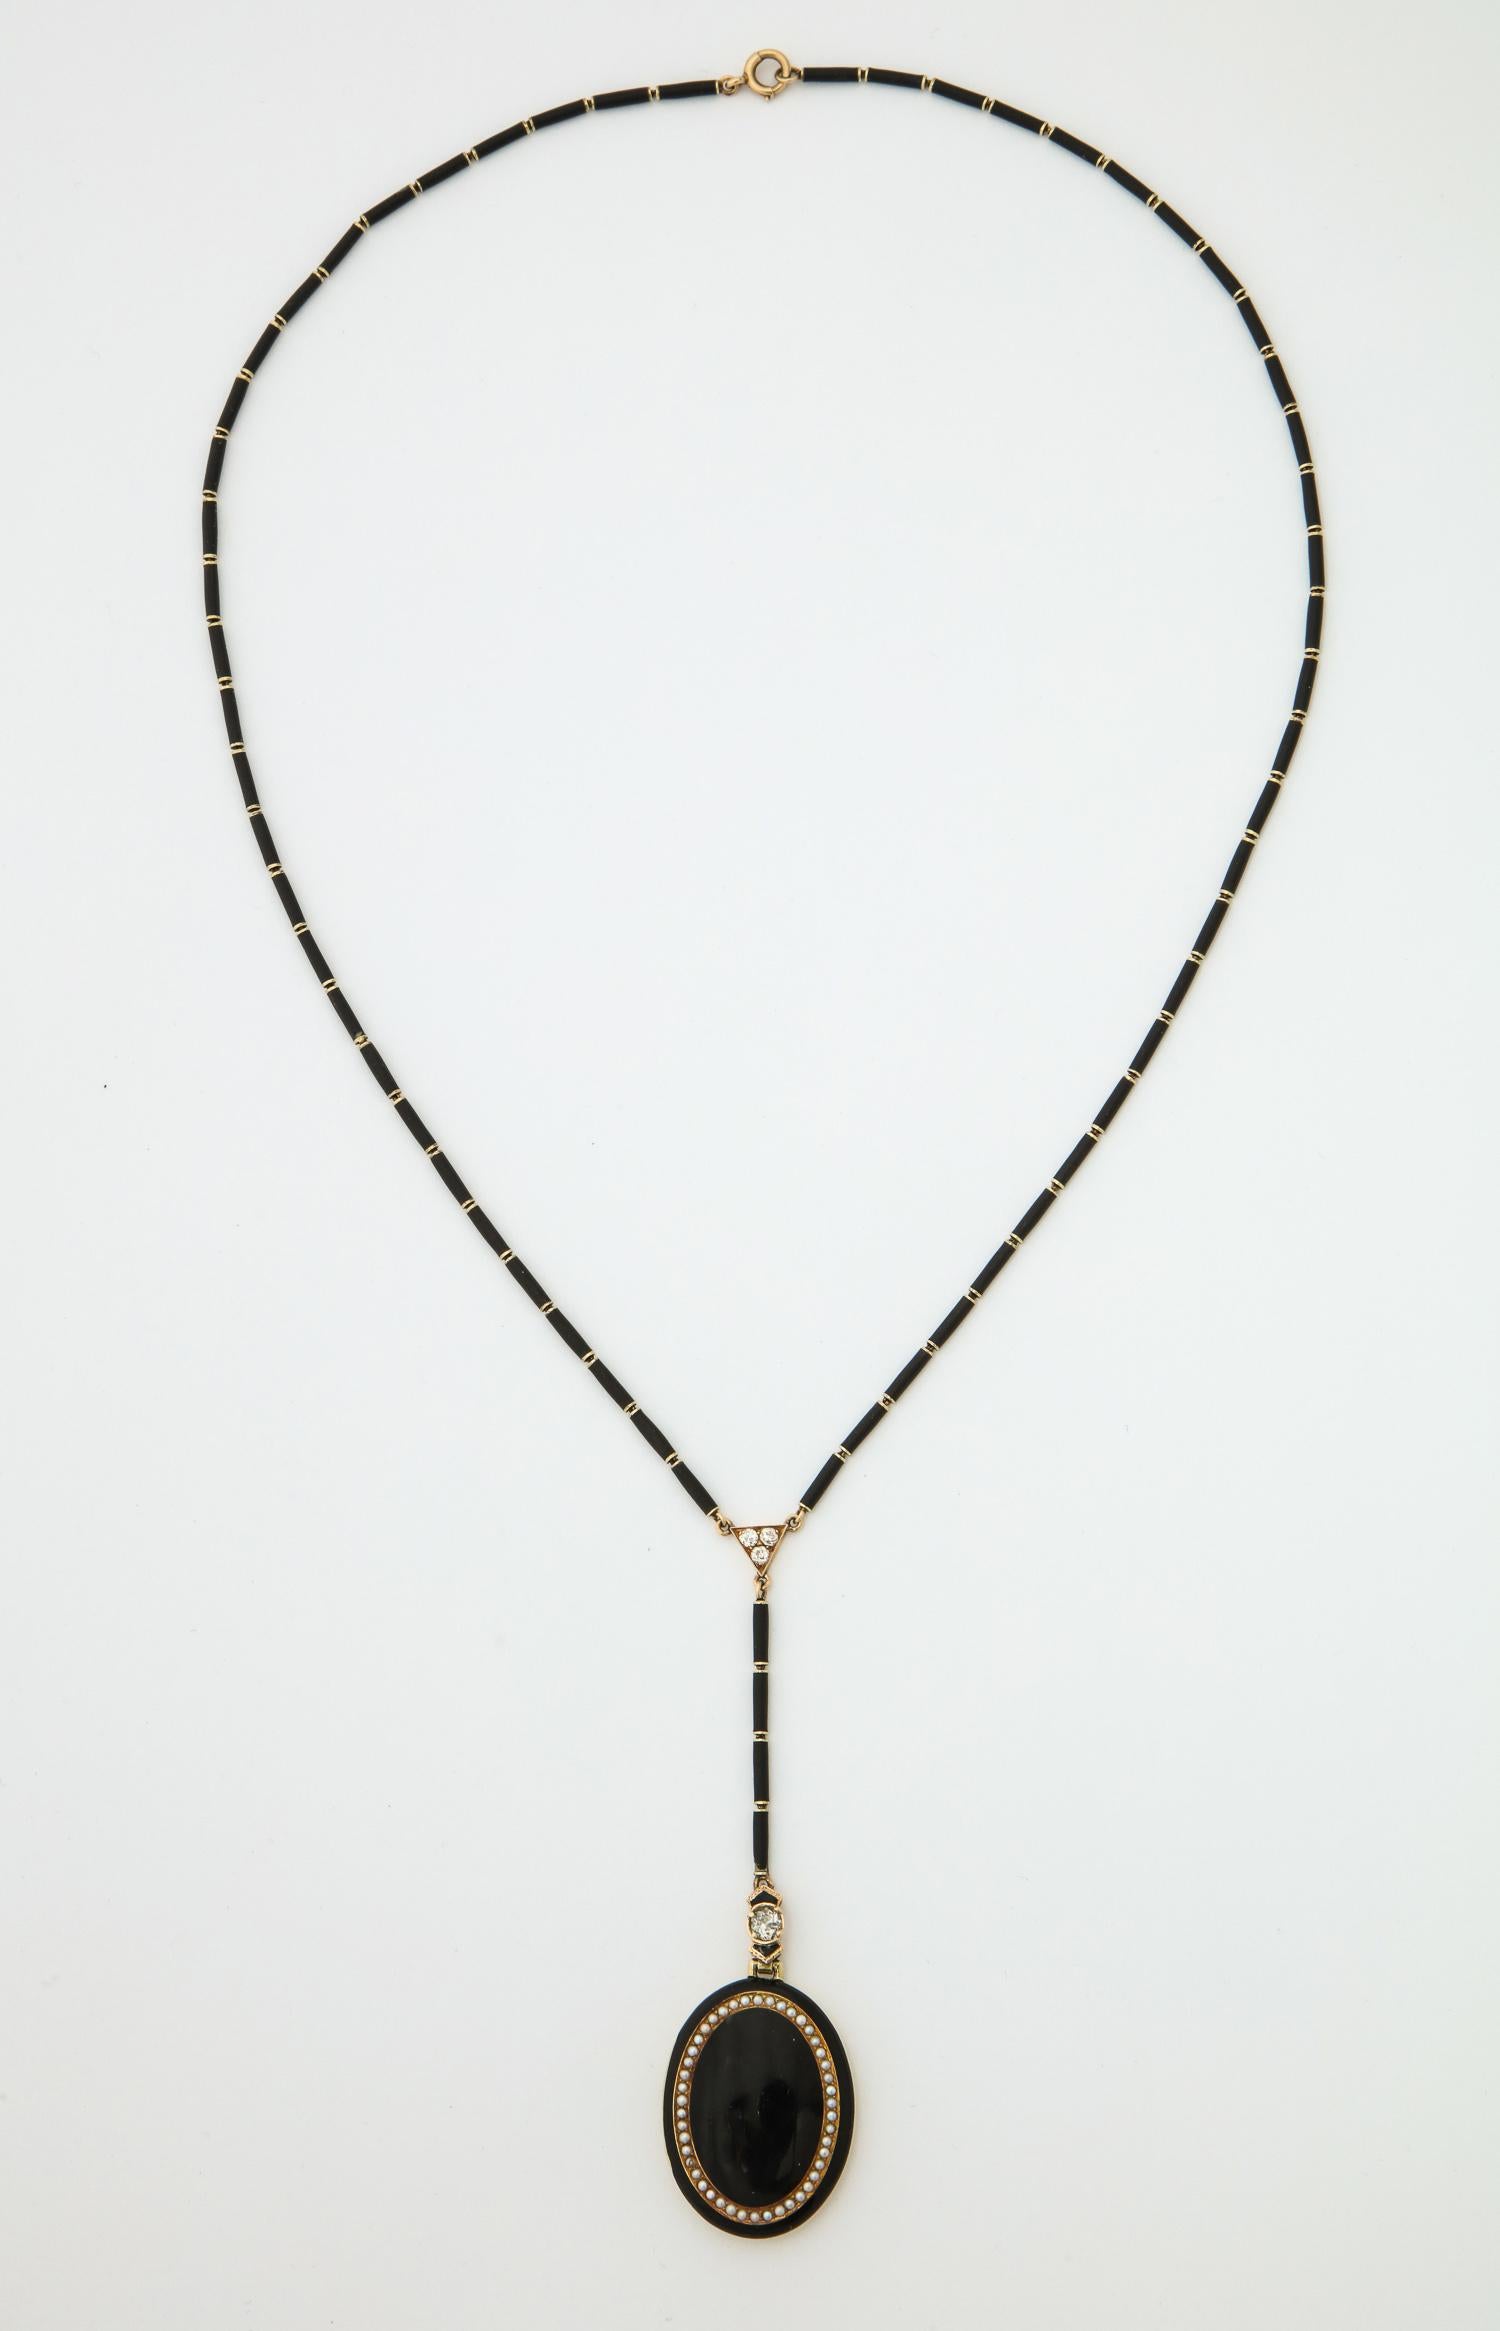 One Ladies Art Deco 18kt Gold Locket Necklace With Chain Designed In Black Enamel And Seed Pearls. Chain Has Four Antique Cut Diamonds .. Necklace Measures 20 inches And With Locket 26 inches Total Length.Spring Ring For Clasp Created In The 1920's